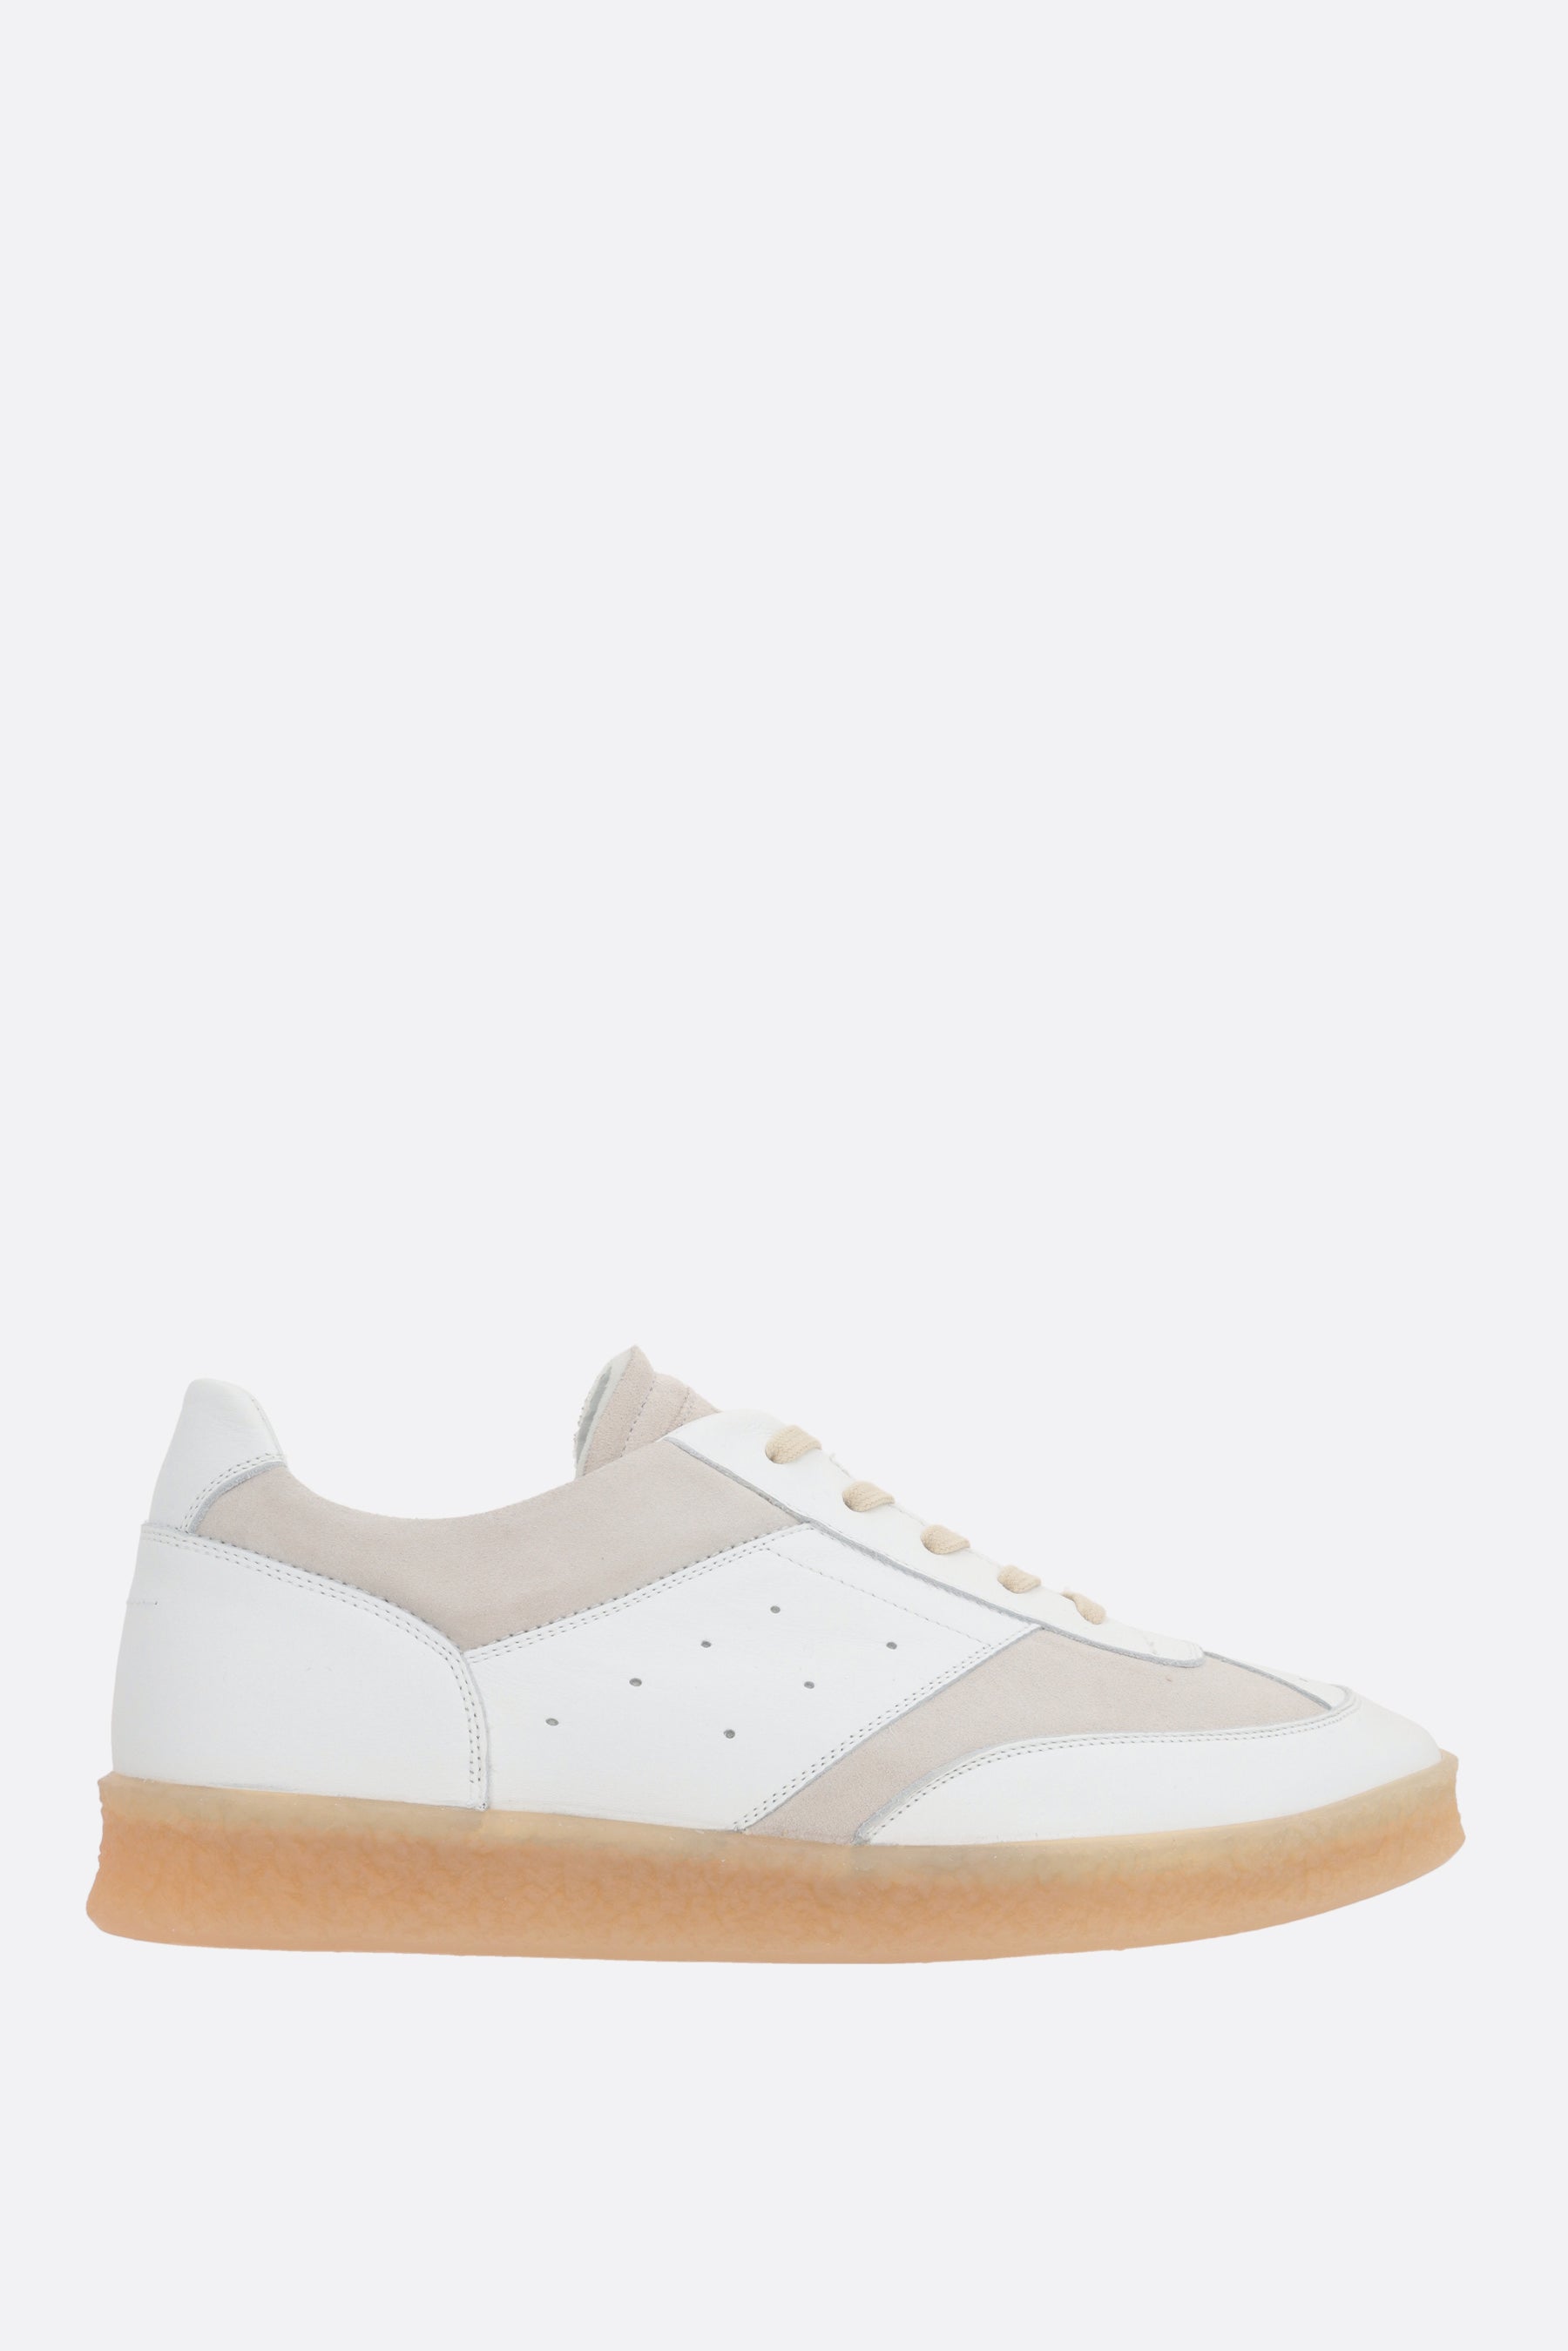 6 Court smooth leather and suede sneakers